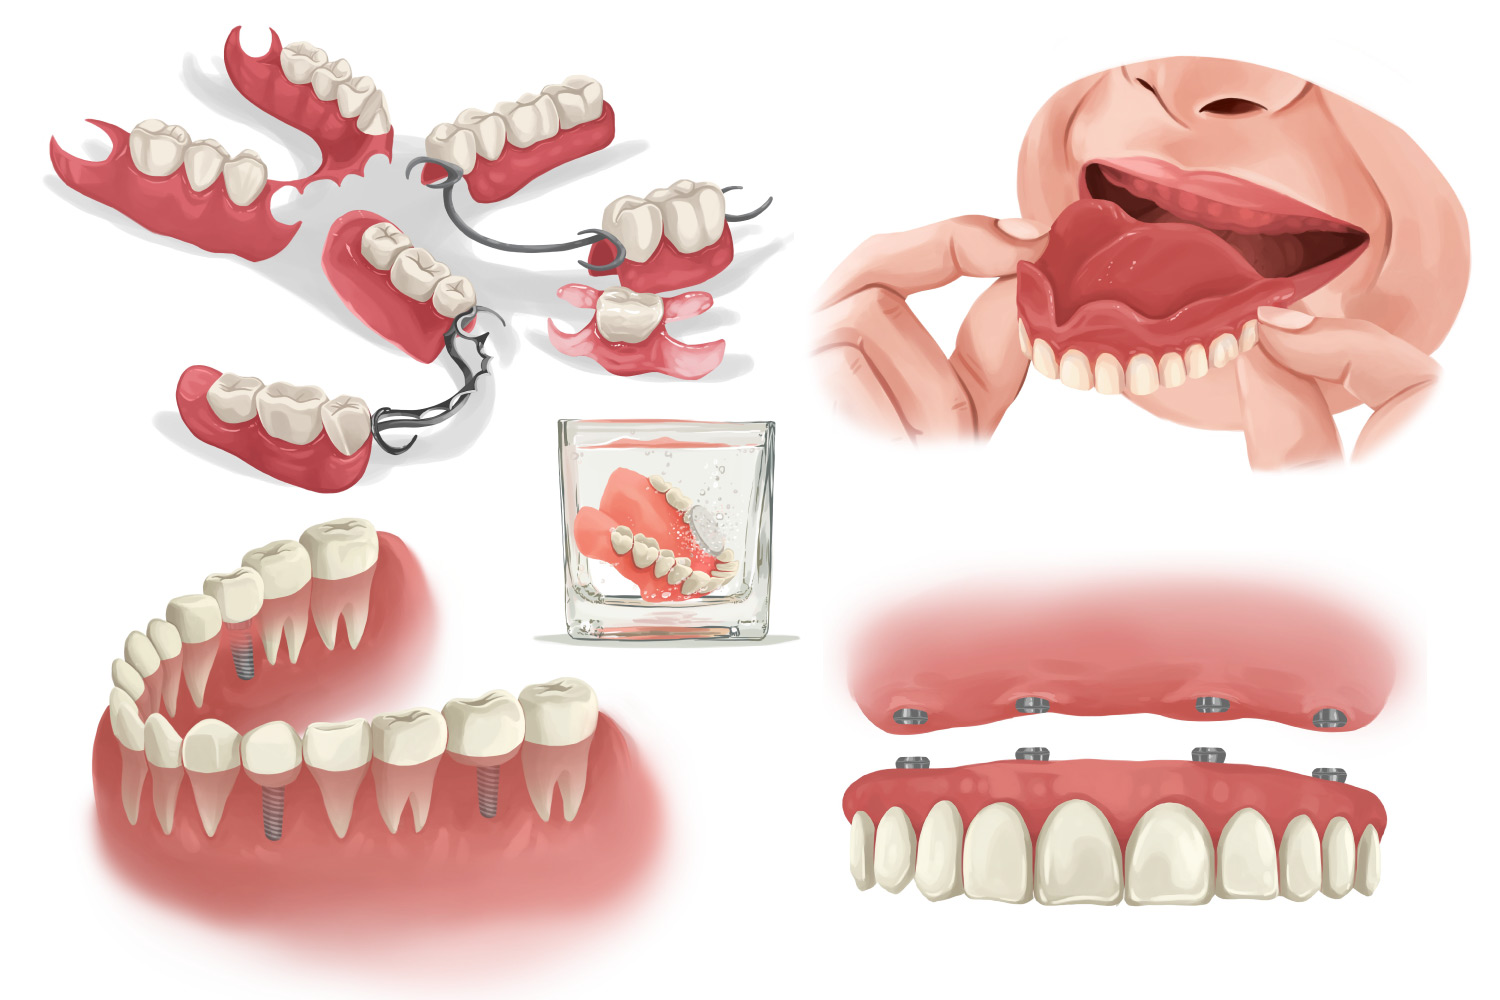 Several illustrations of partial dentures, full dentures, and dental implants to replace missing teeth